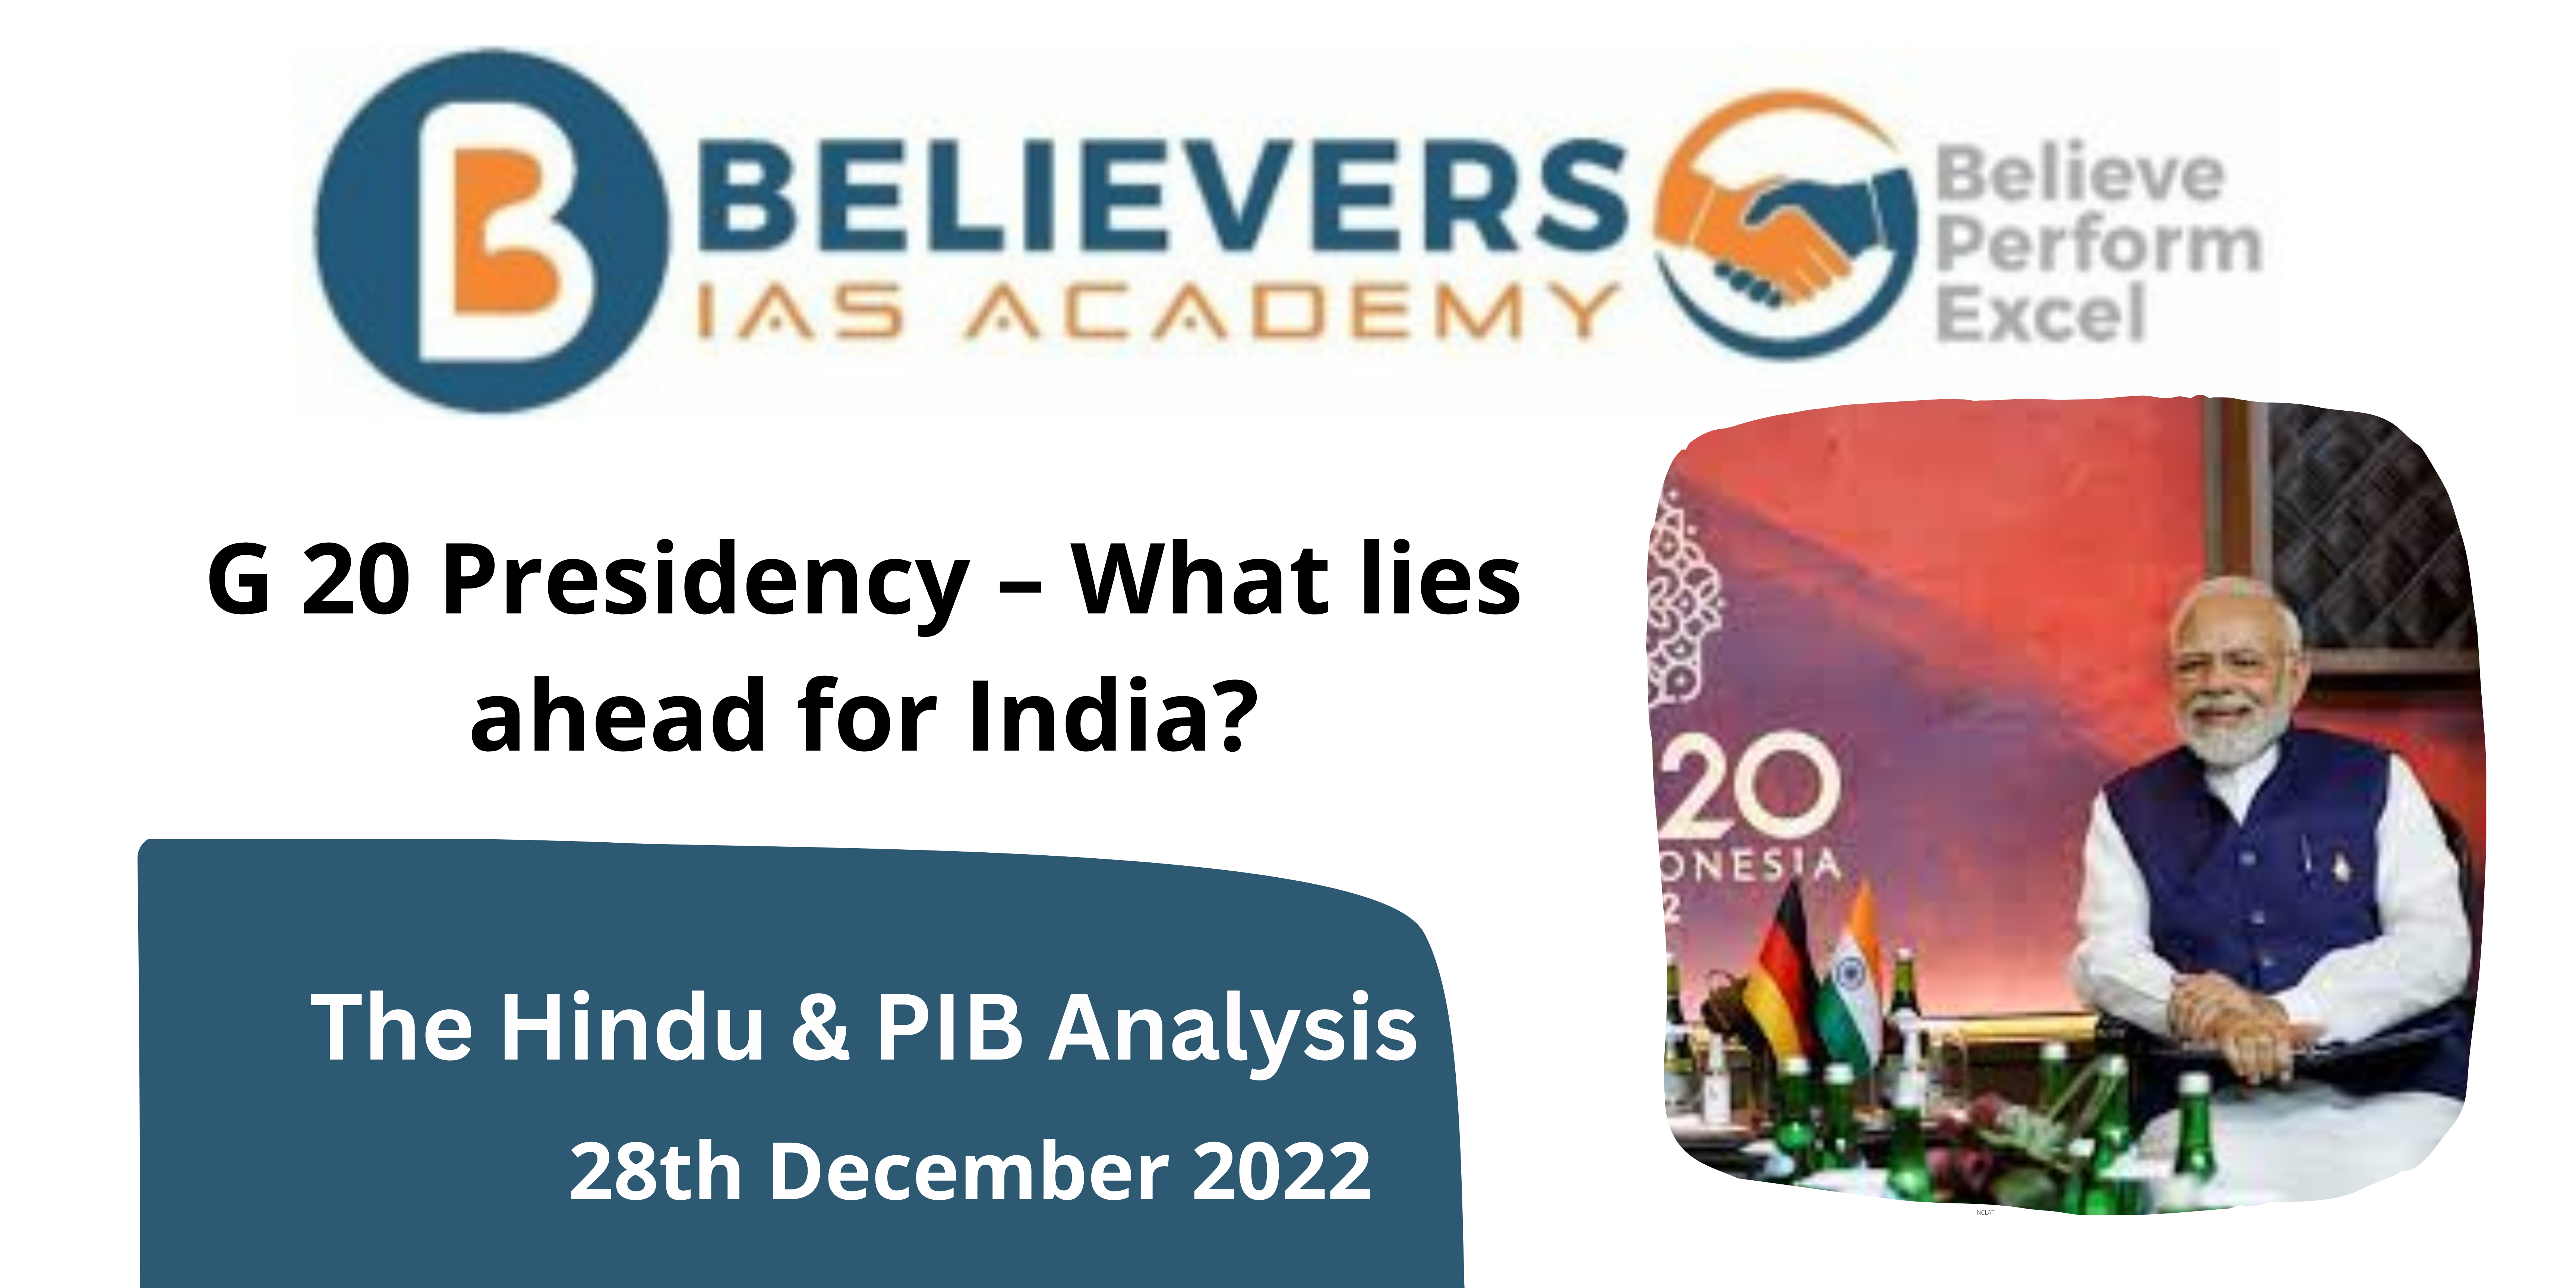 G 20 Presidency – What lies ahead for India?